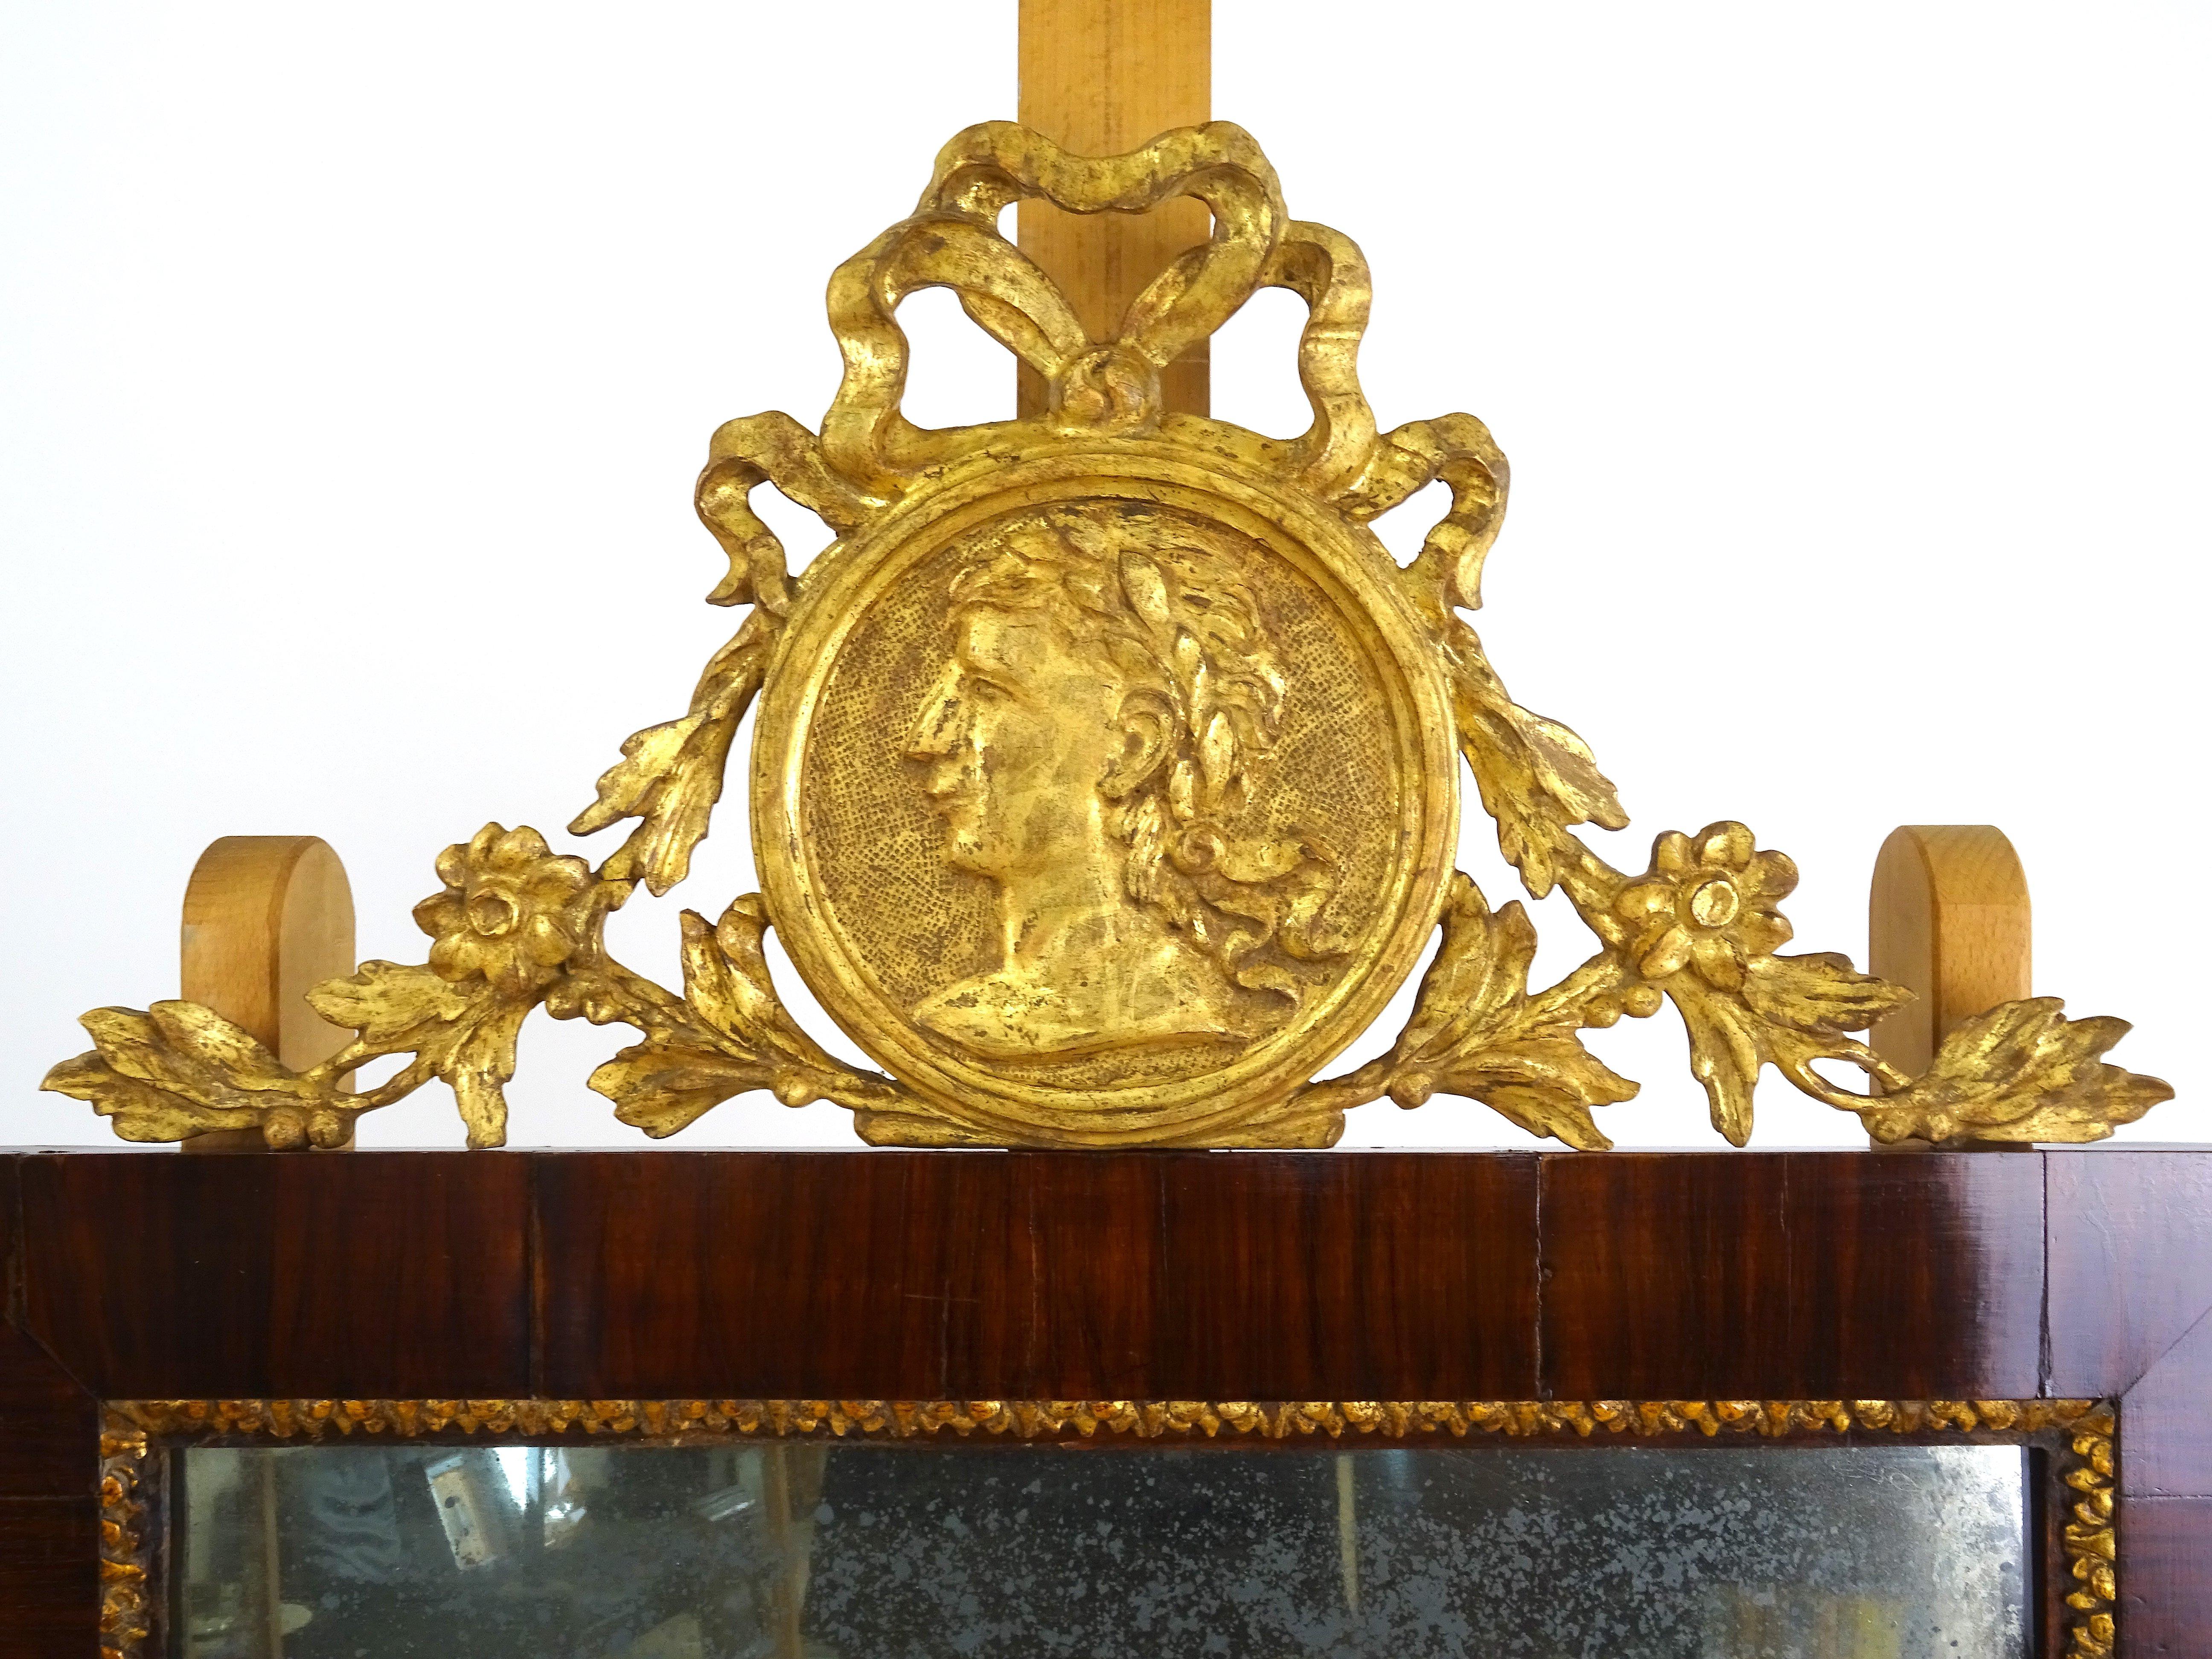 The piece in question is an elegant frame with a mirror, with a carved and gilded wooden molding in the upper part composed of a floral decoration and a central medallion depicting a face in profile.

The wooden frame and mahogany veneer, is of